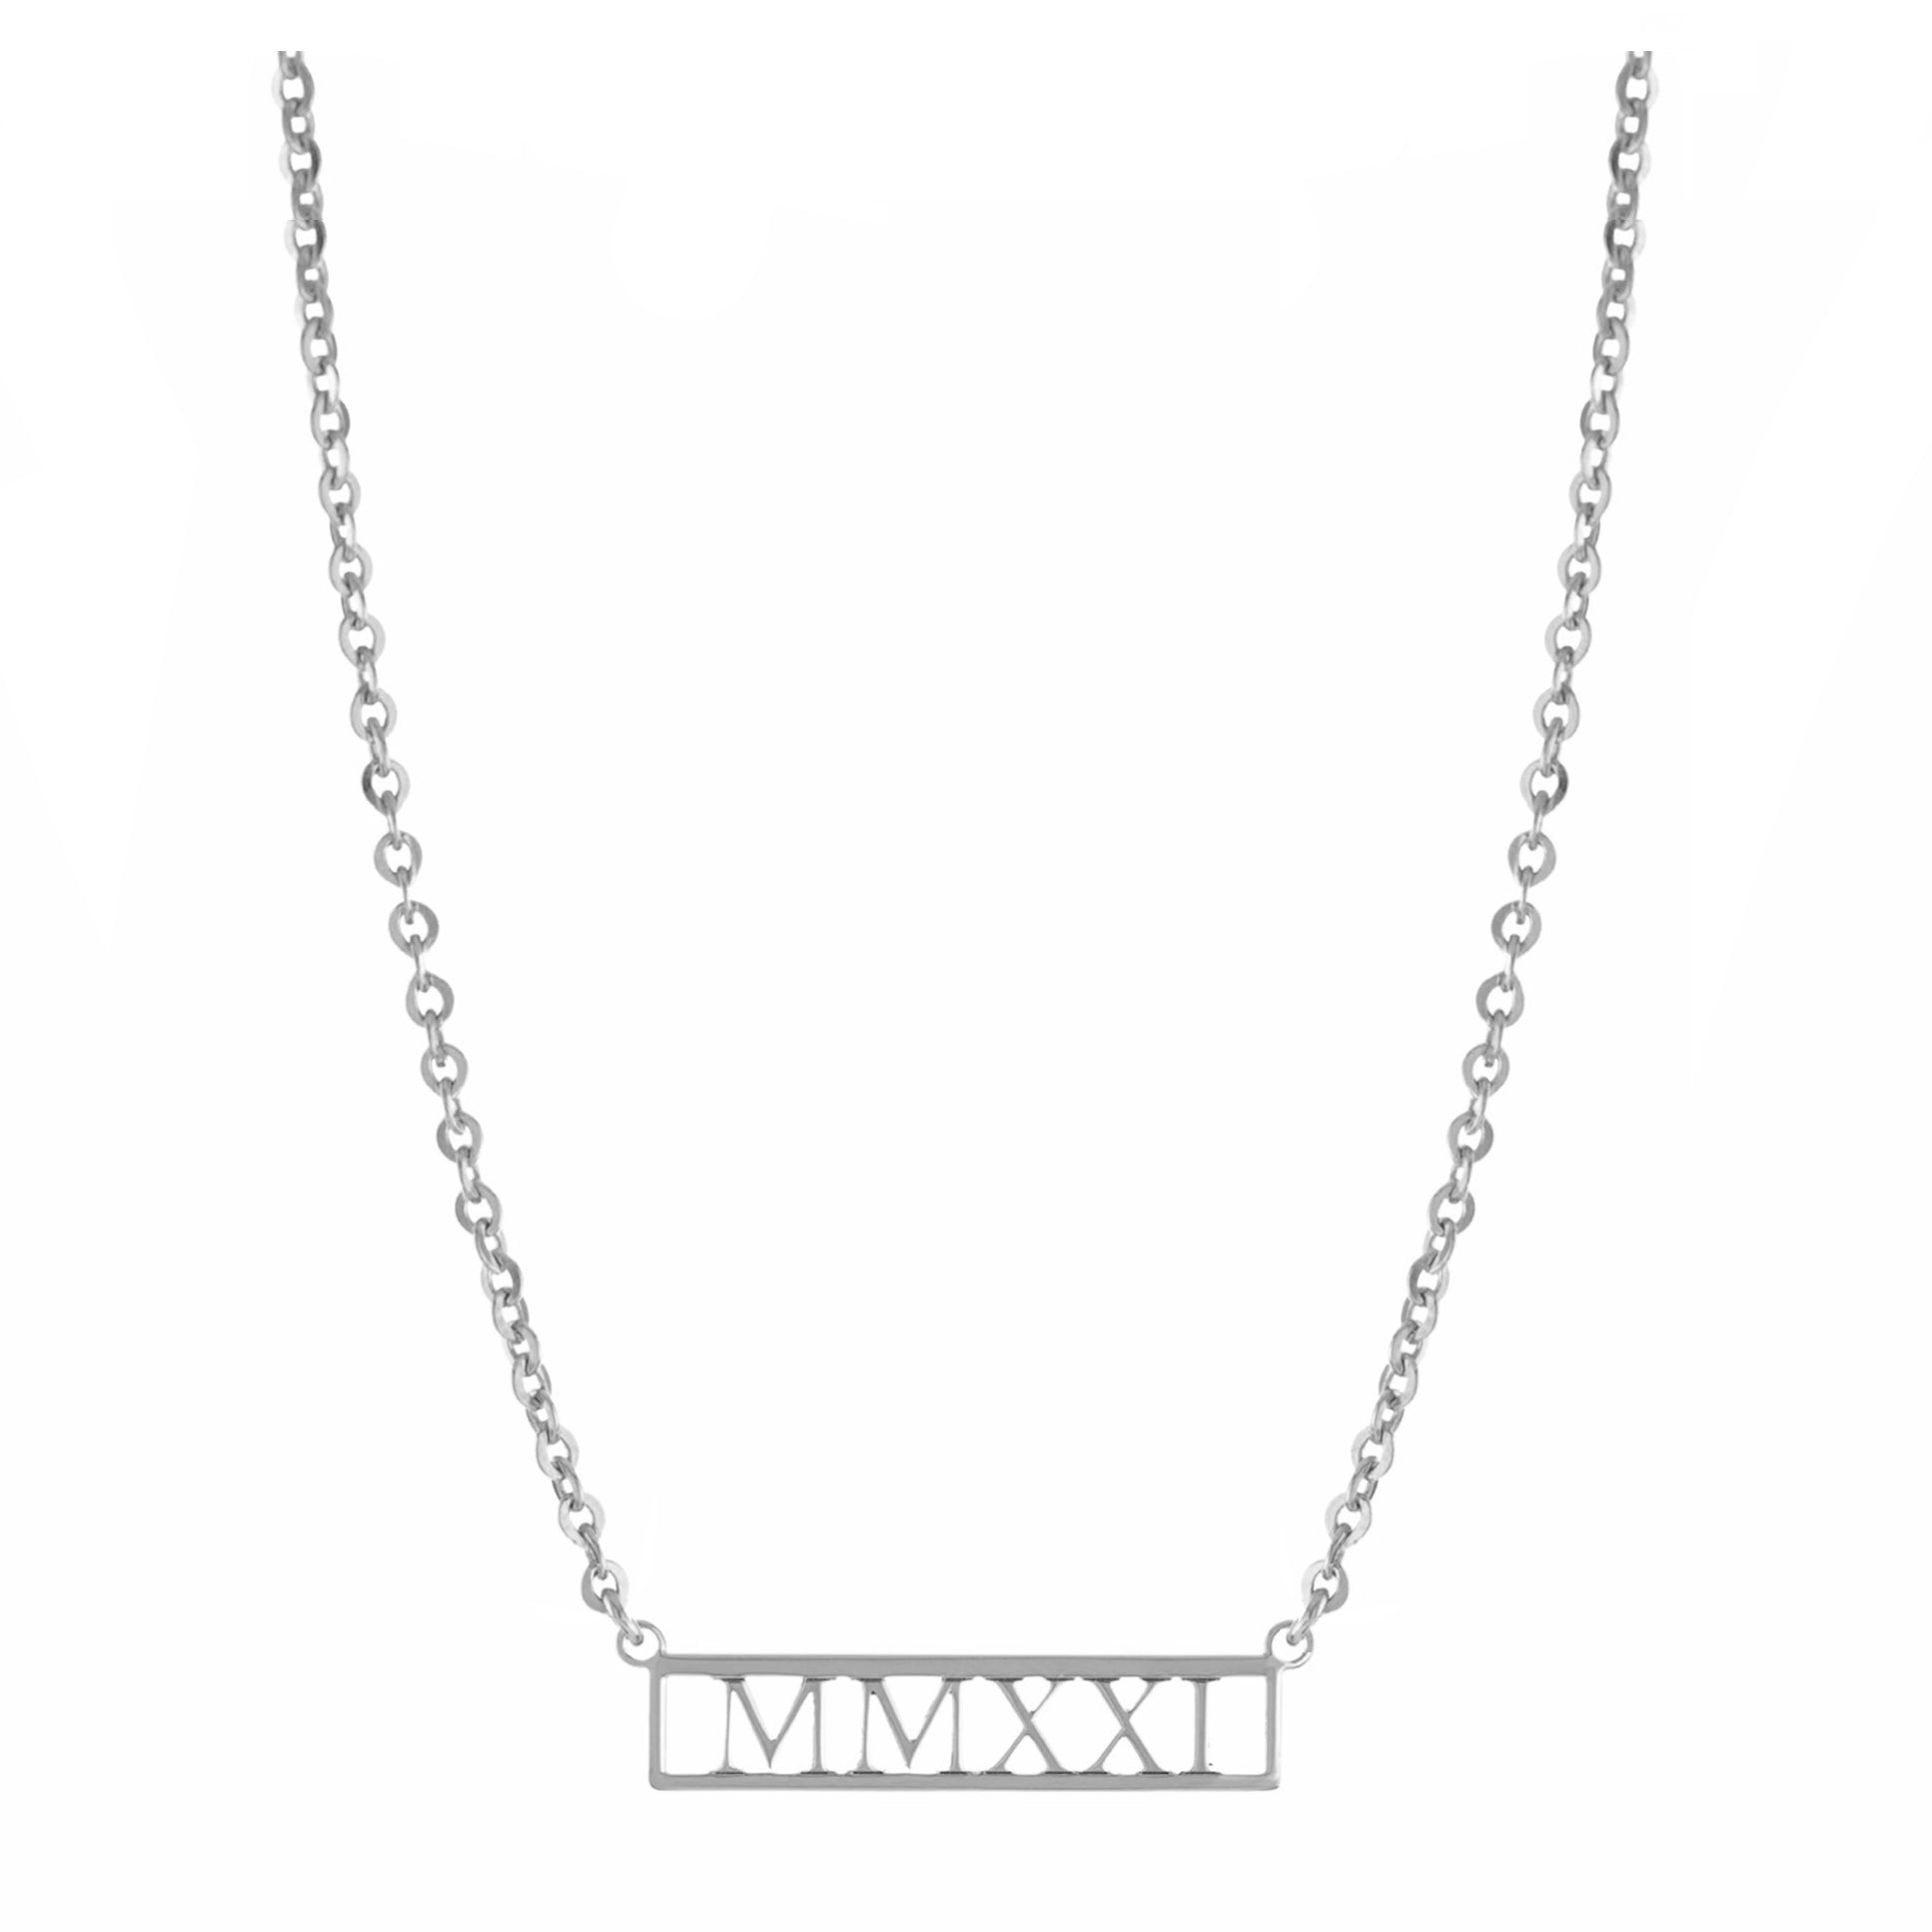 Personalized Cut-Out Roman numeral Necklace